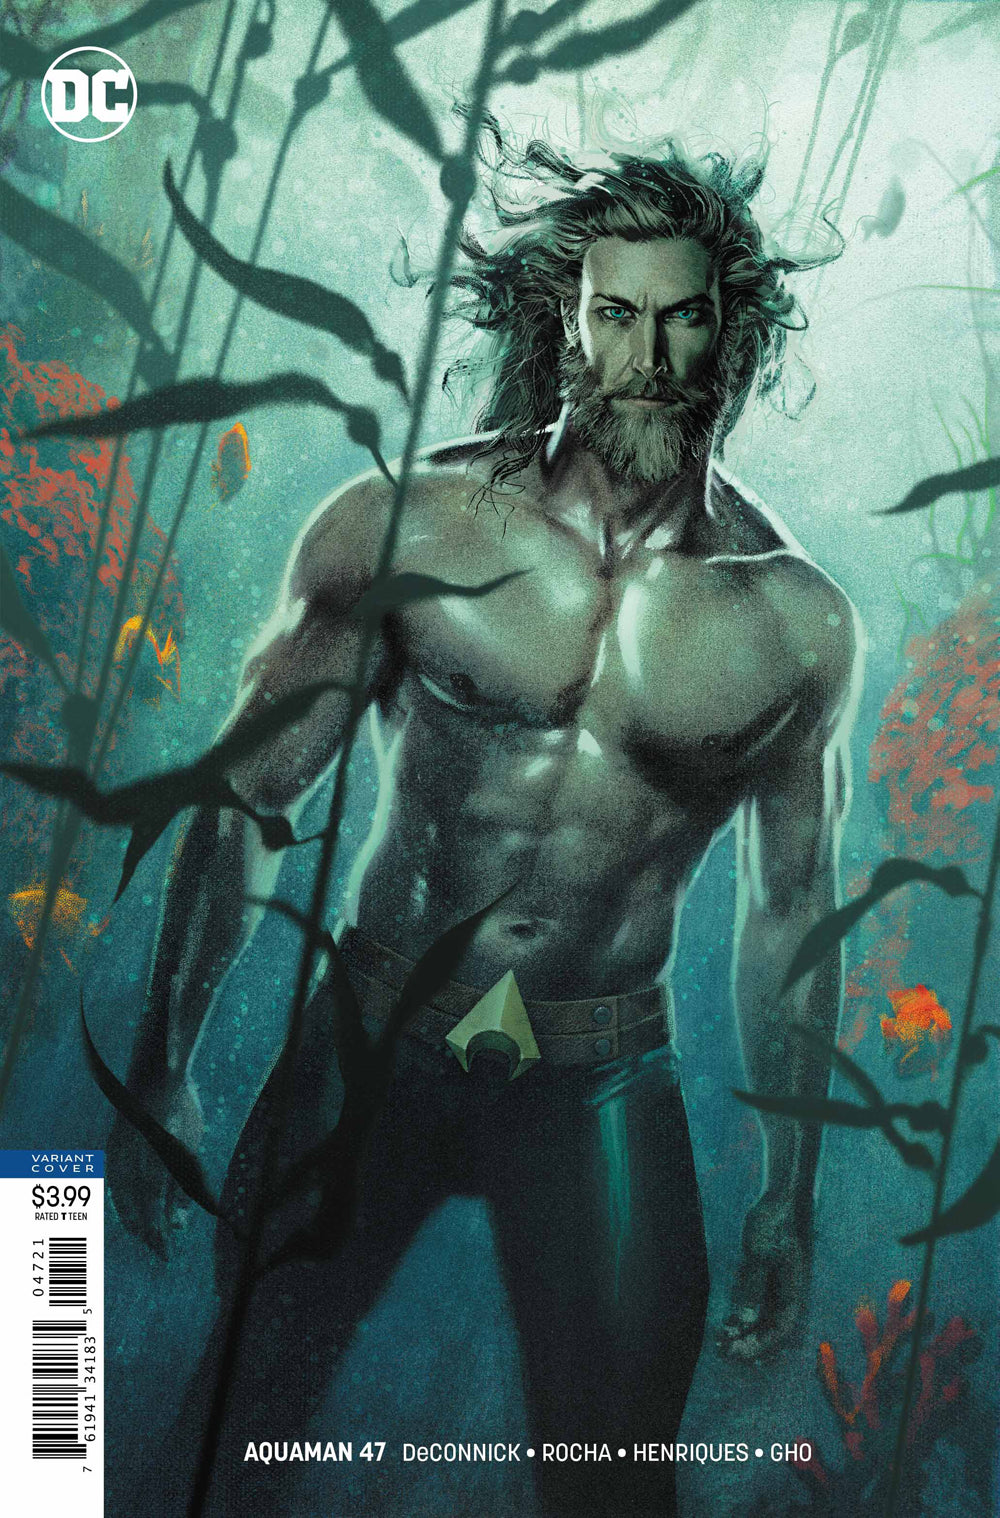 Photo of Aquaman Issue 47 Var Ed comic sold by Stronghold Collectibles